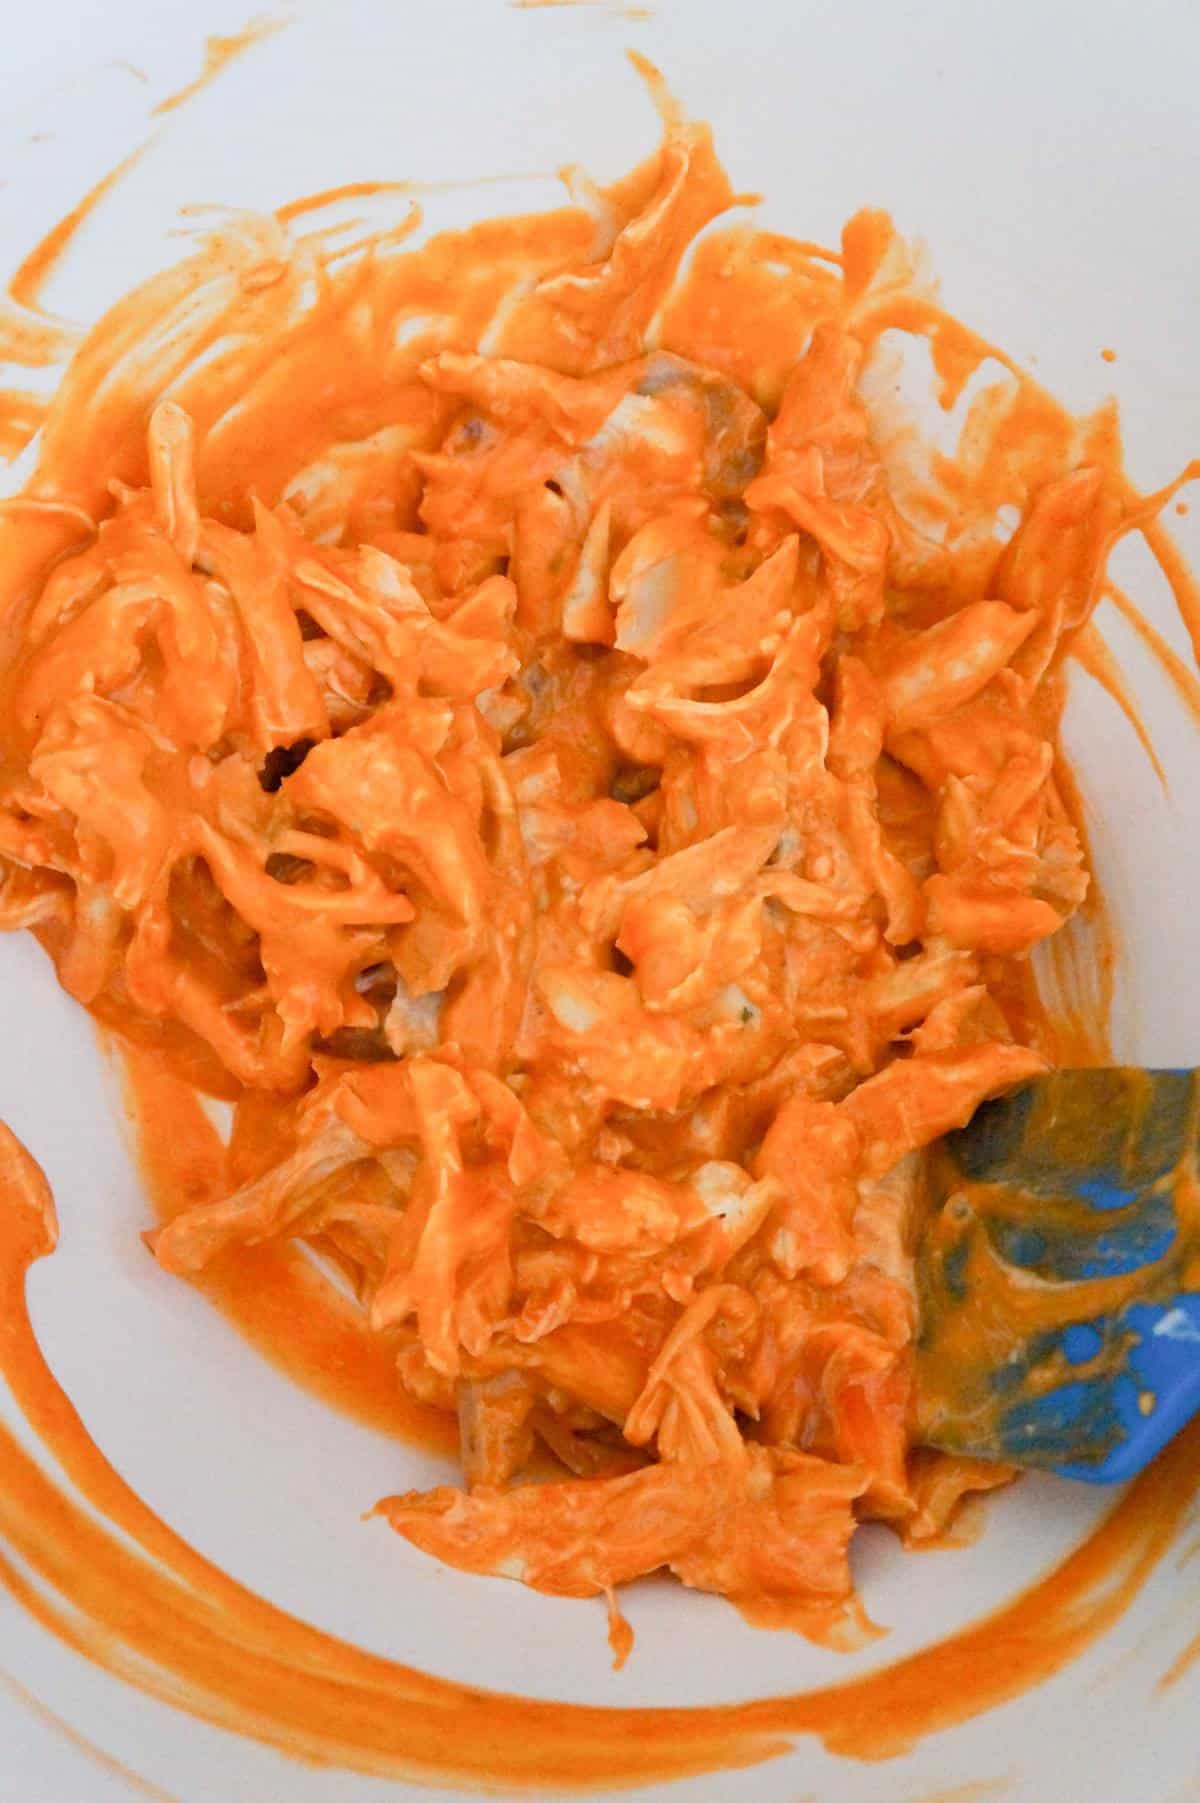 shredded chicken tossed in buffalo sauce in a mixing bowl